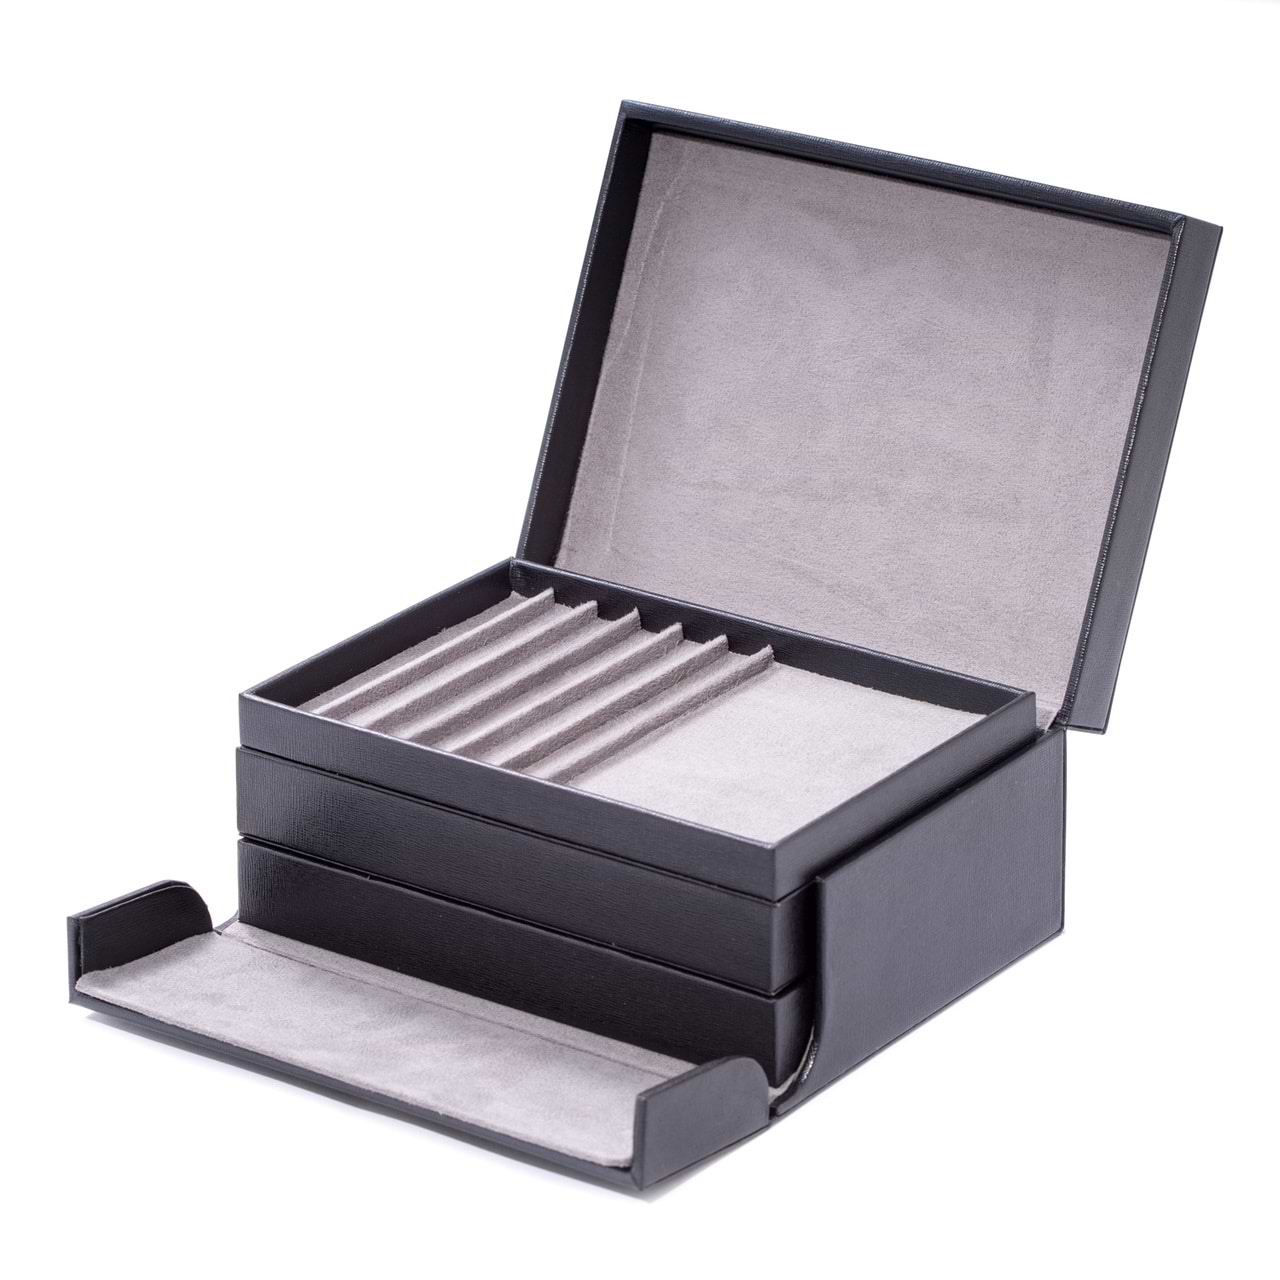 Black Leather Valet Box w/ Removable Tray for 4 Watches & 8 Cufflinks